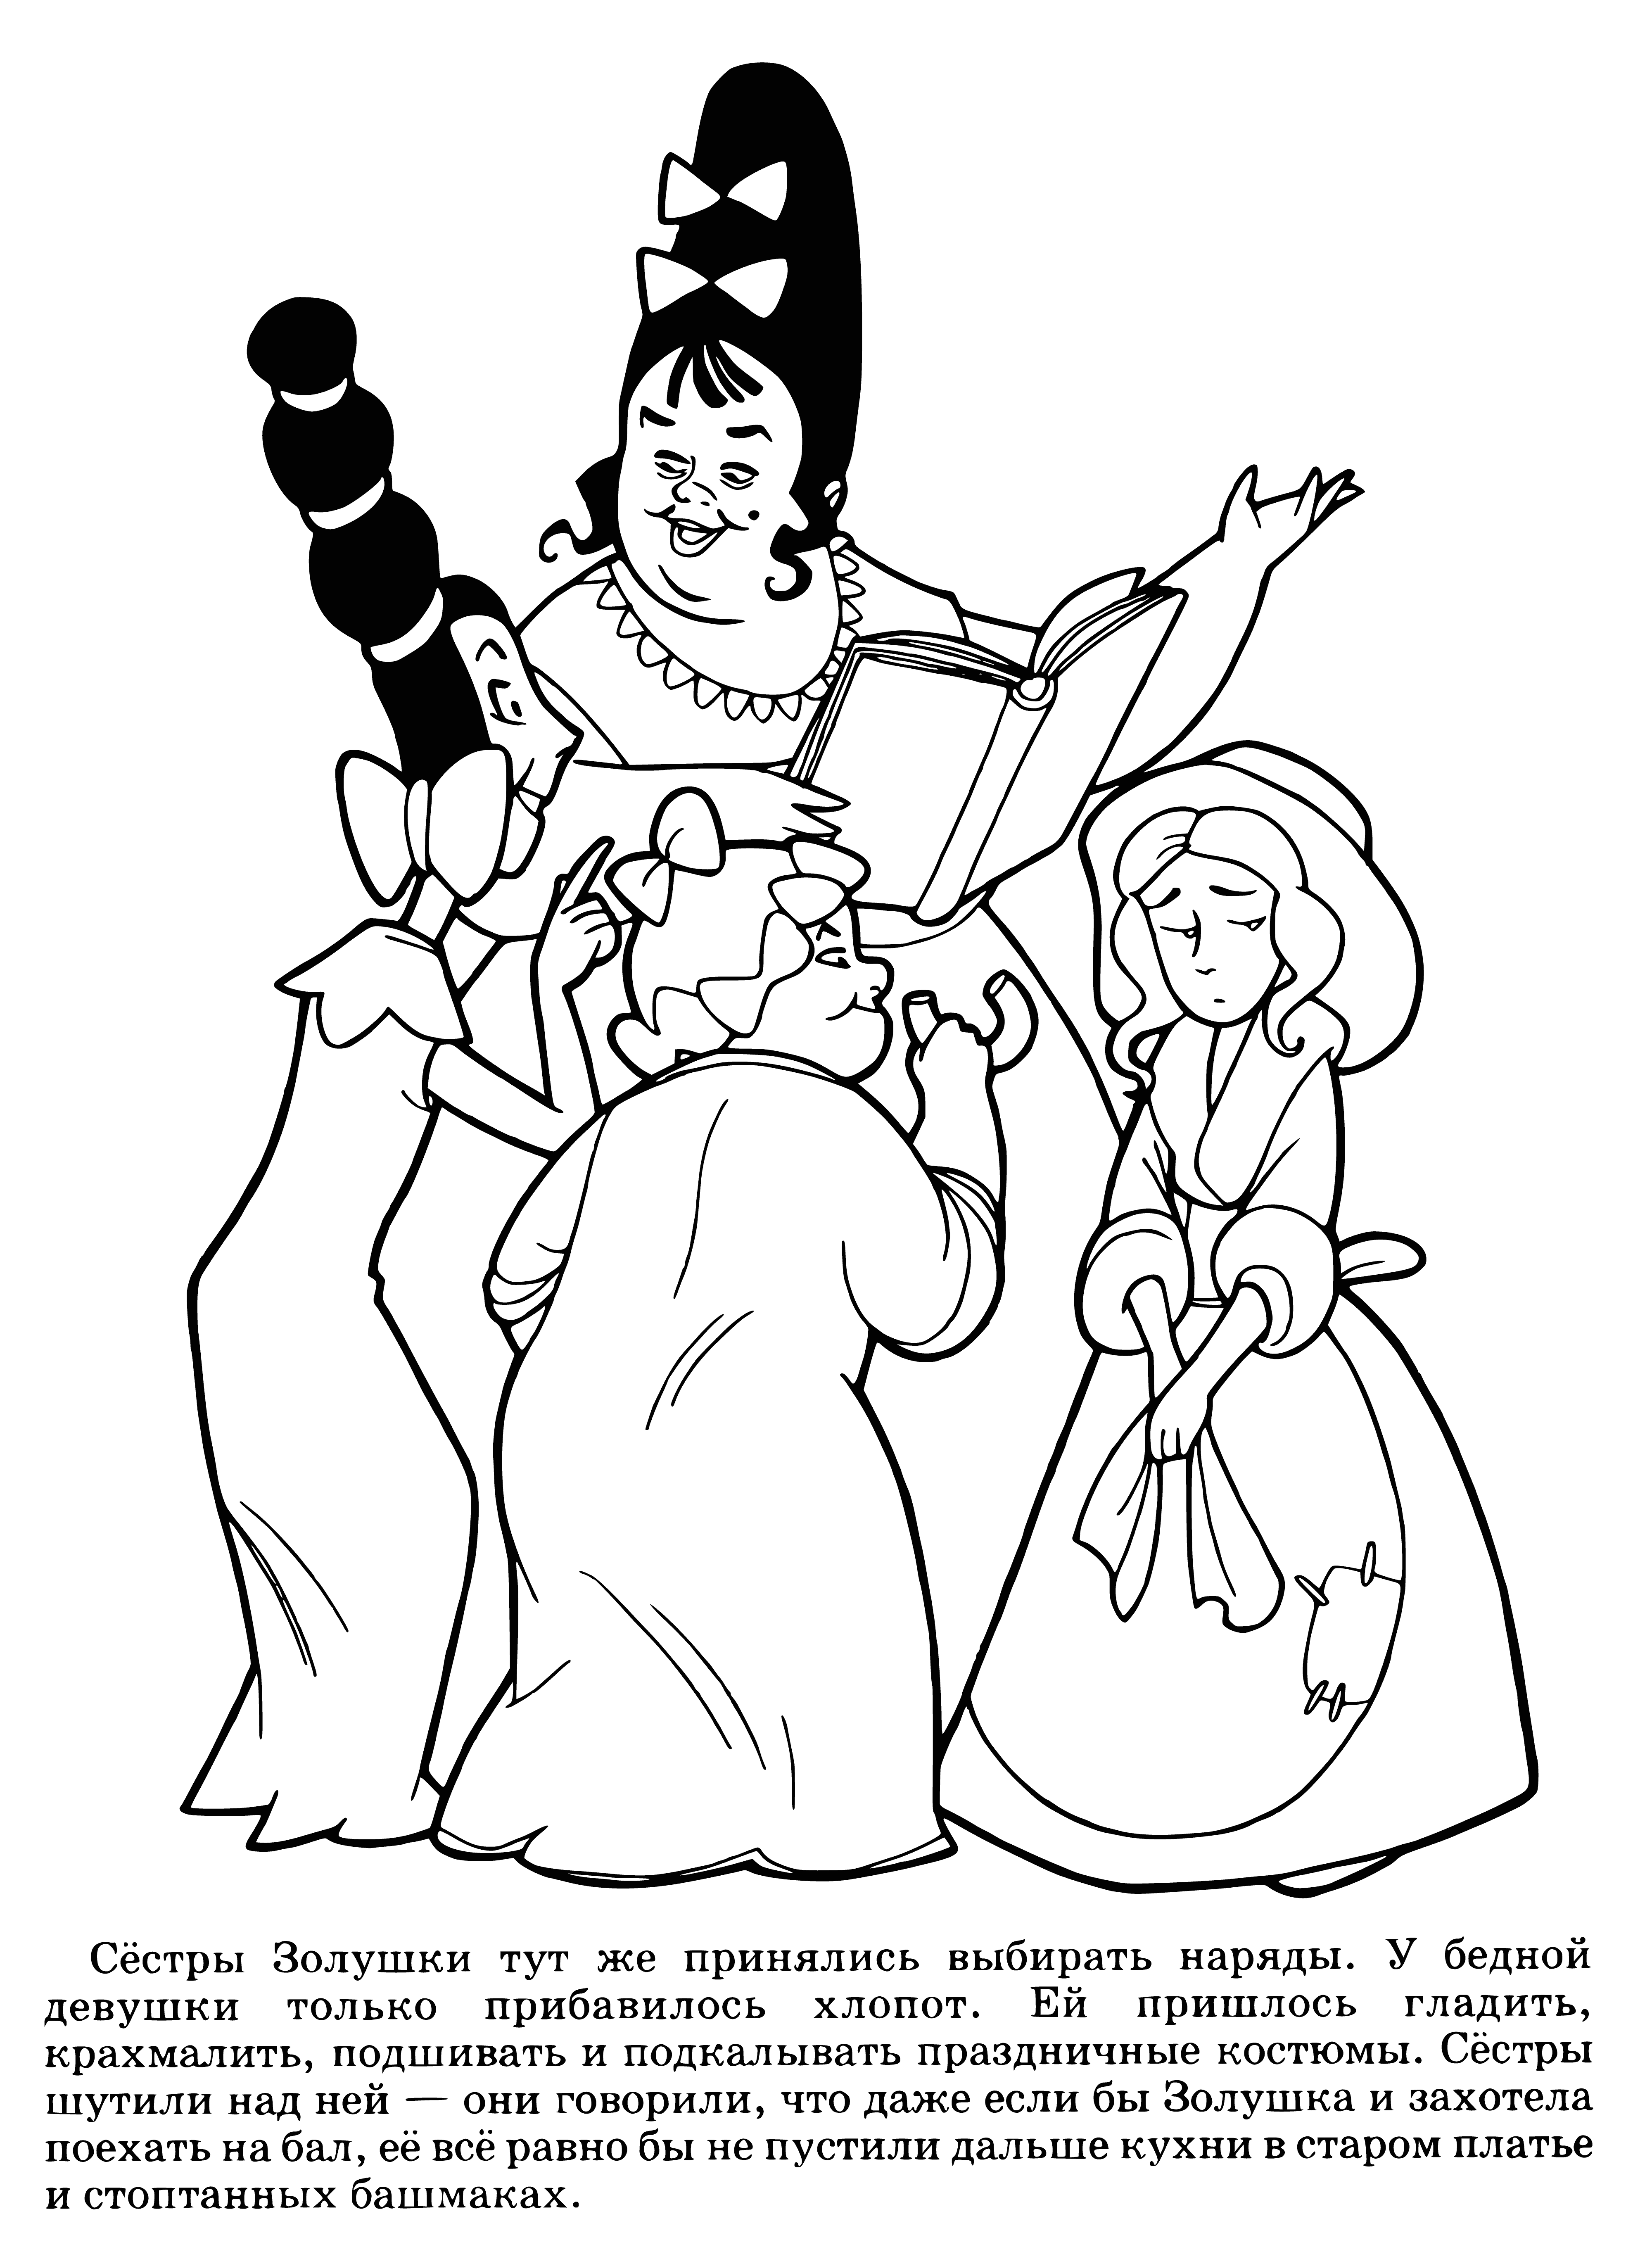 coloring page: 2 girls with blonde hair & blue eyes in white dresses w/ gold trim. One is holding a pumpkin, the other a broom. In front of a fireplace. #Halloween